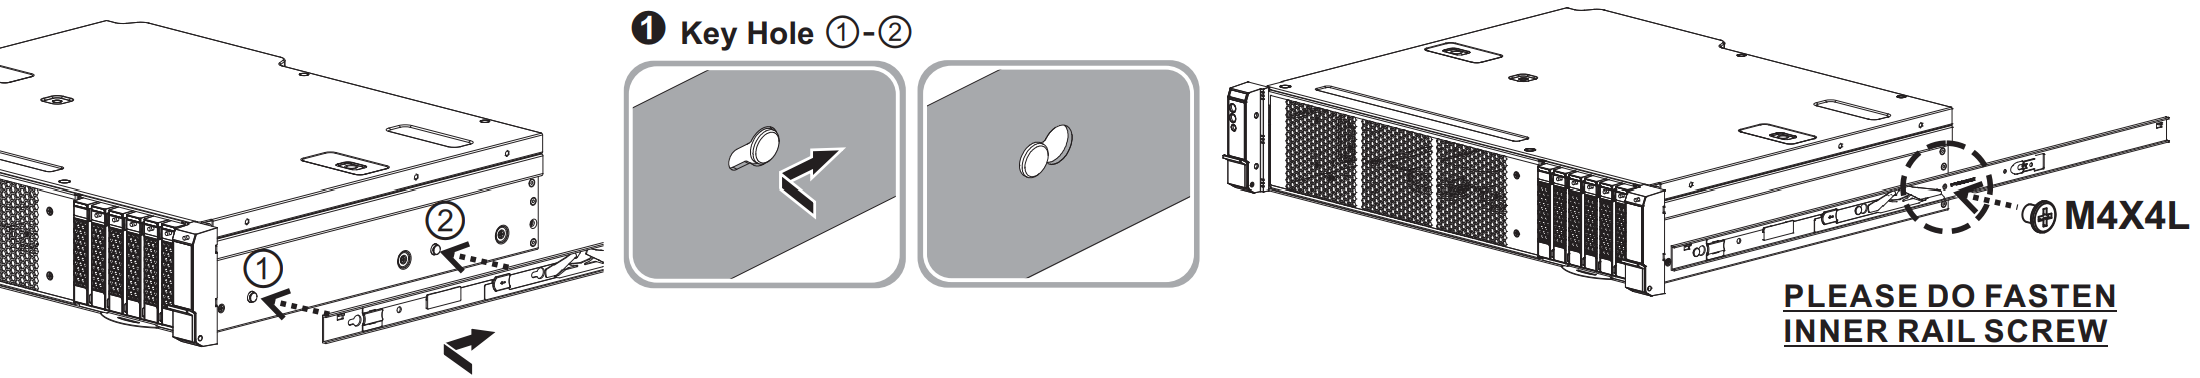 Diagram showing how to install inner rail onto the device chassis using a 4-post rackmount accessory.